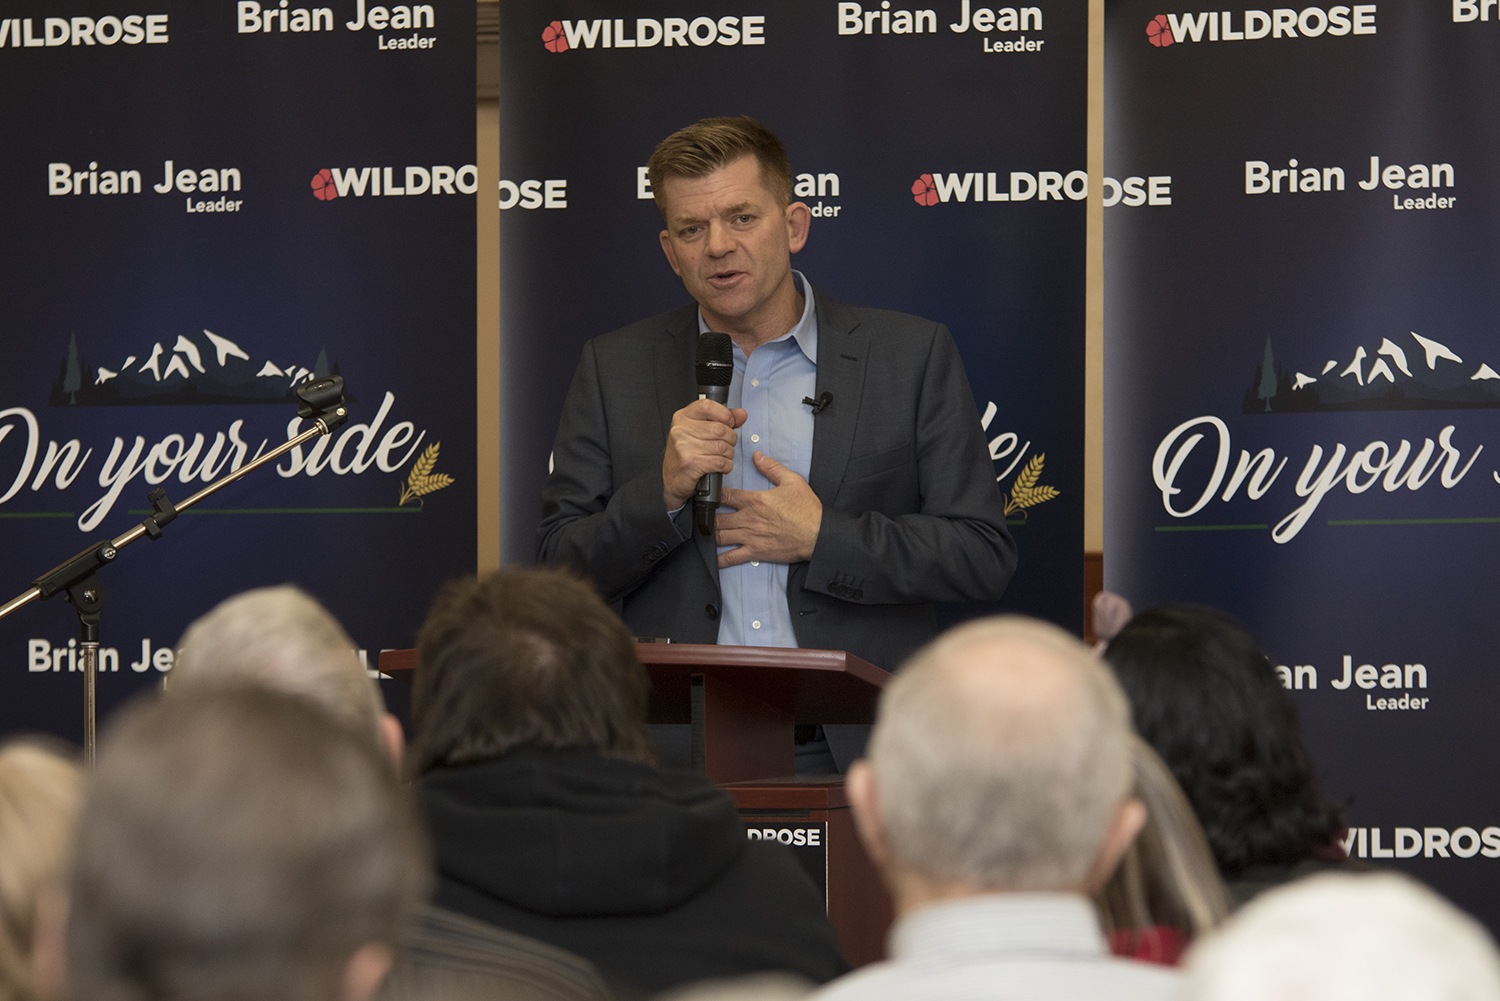 SPEAKING OUT - Wildrose Leader Brian Jean addresses the audience during a public meeting at the Lacombe Memorial Centre last week.